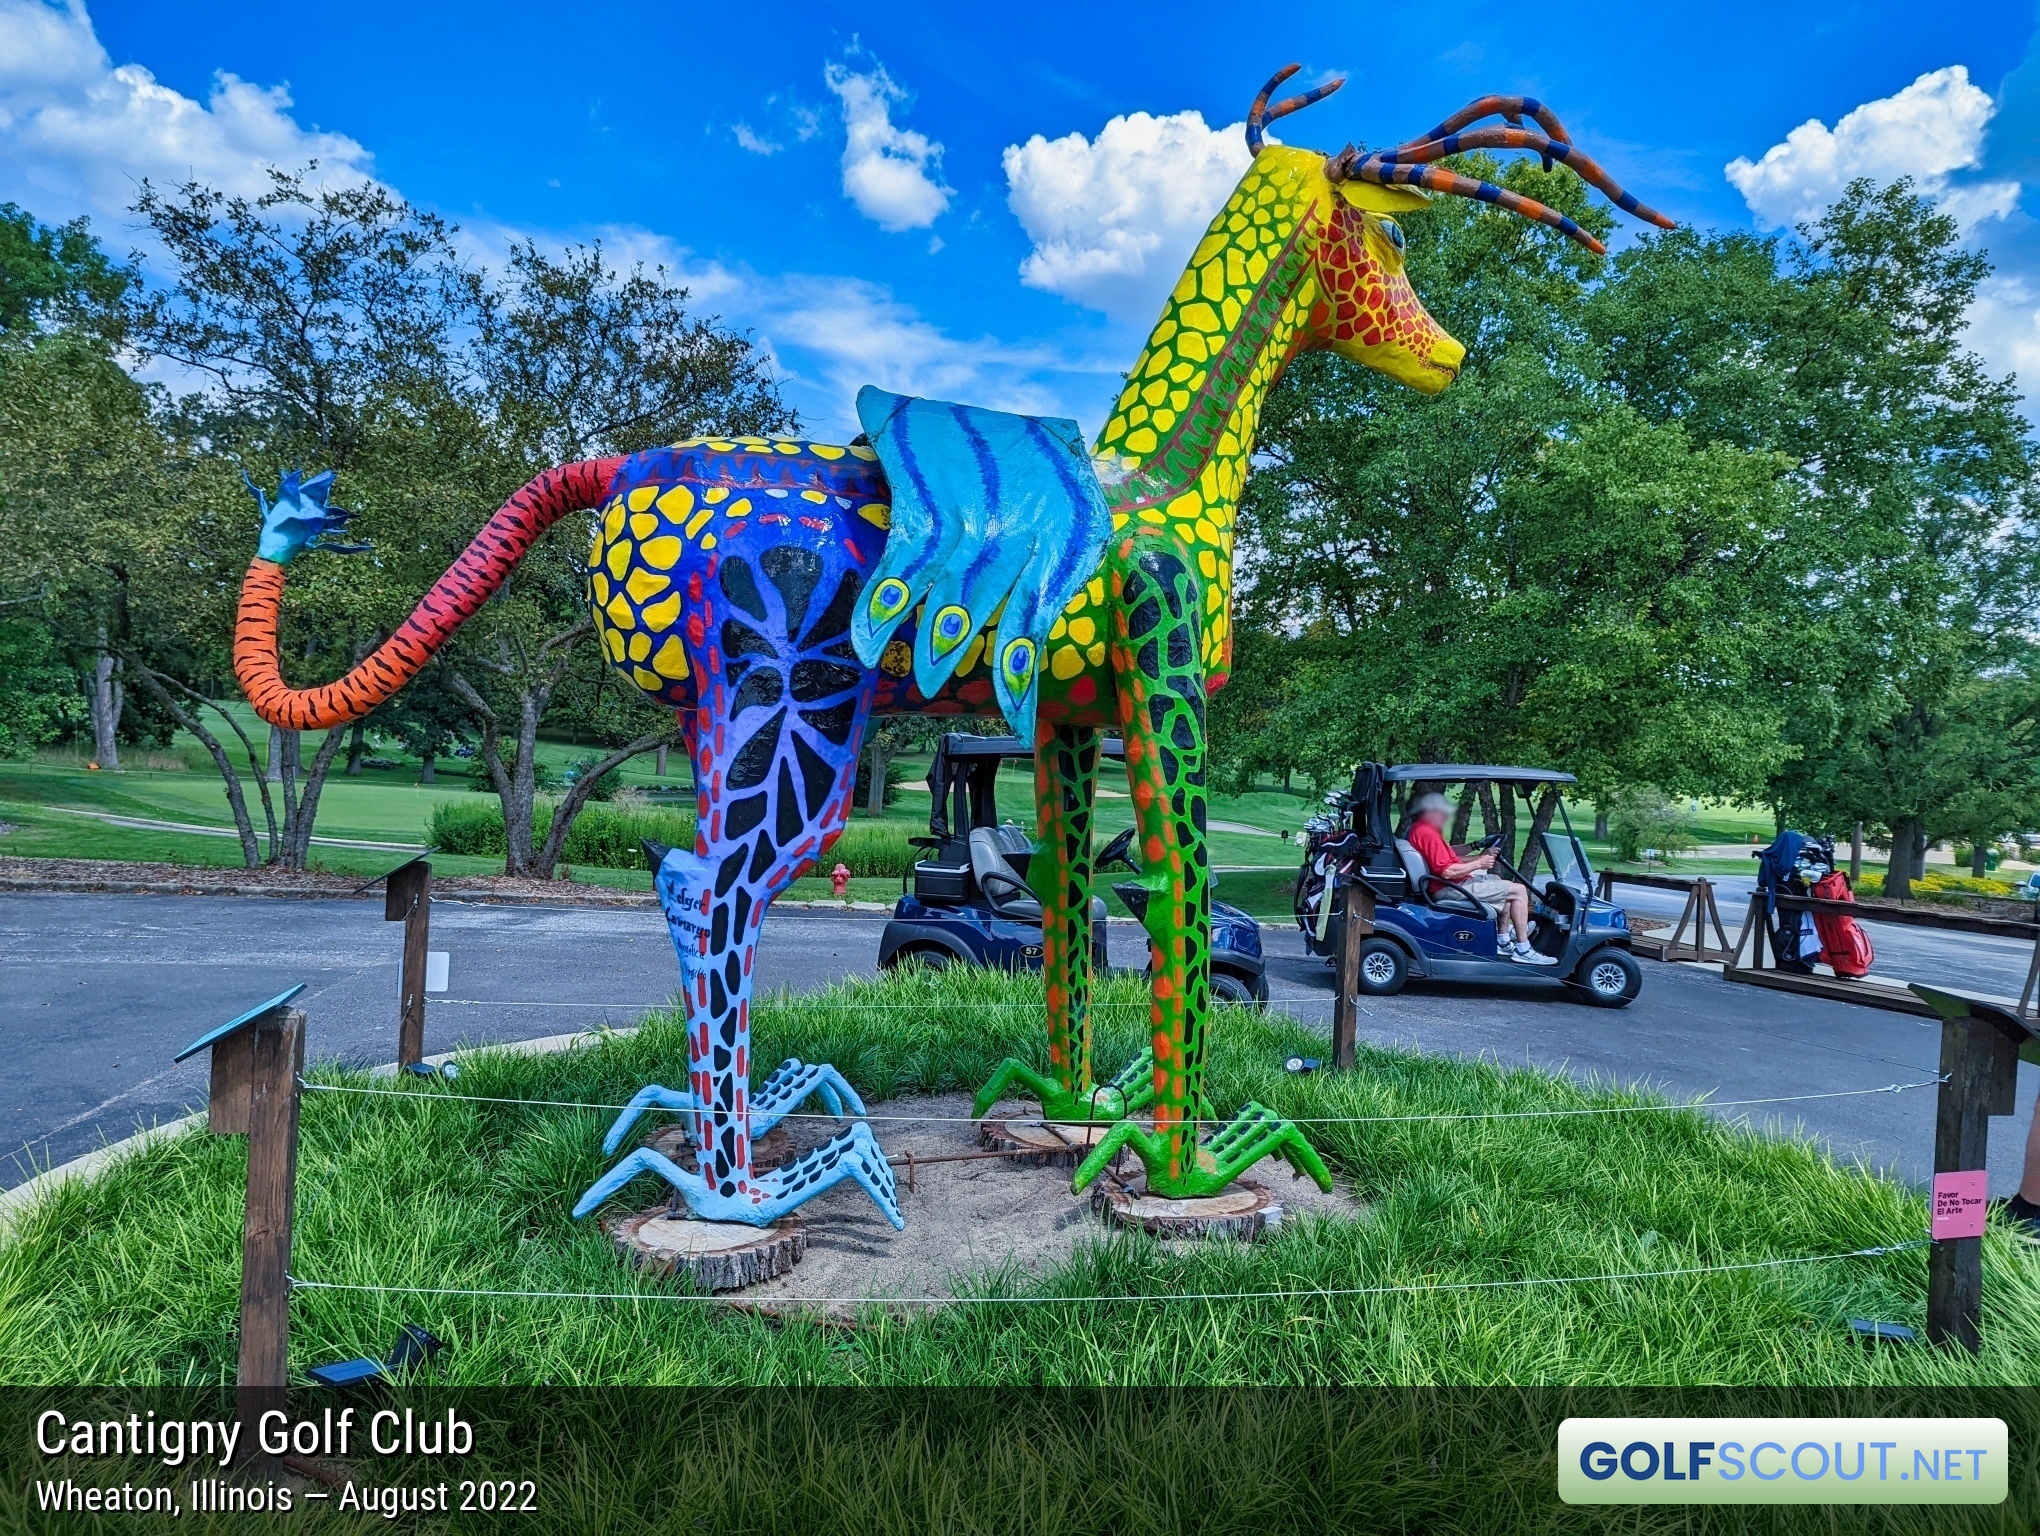 Miscellaneous photo of Cantigny Woodside Course in Wheaton, Illinois. This was part of an outdoor art exhibit featuring imaginary creatures inspired by Mexican folklore, entitled “Alebrijes: Creatures of a Dream World” and was on display through October 2022.